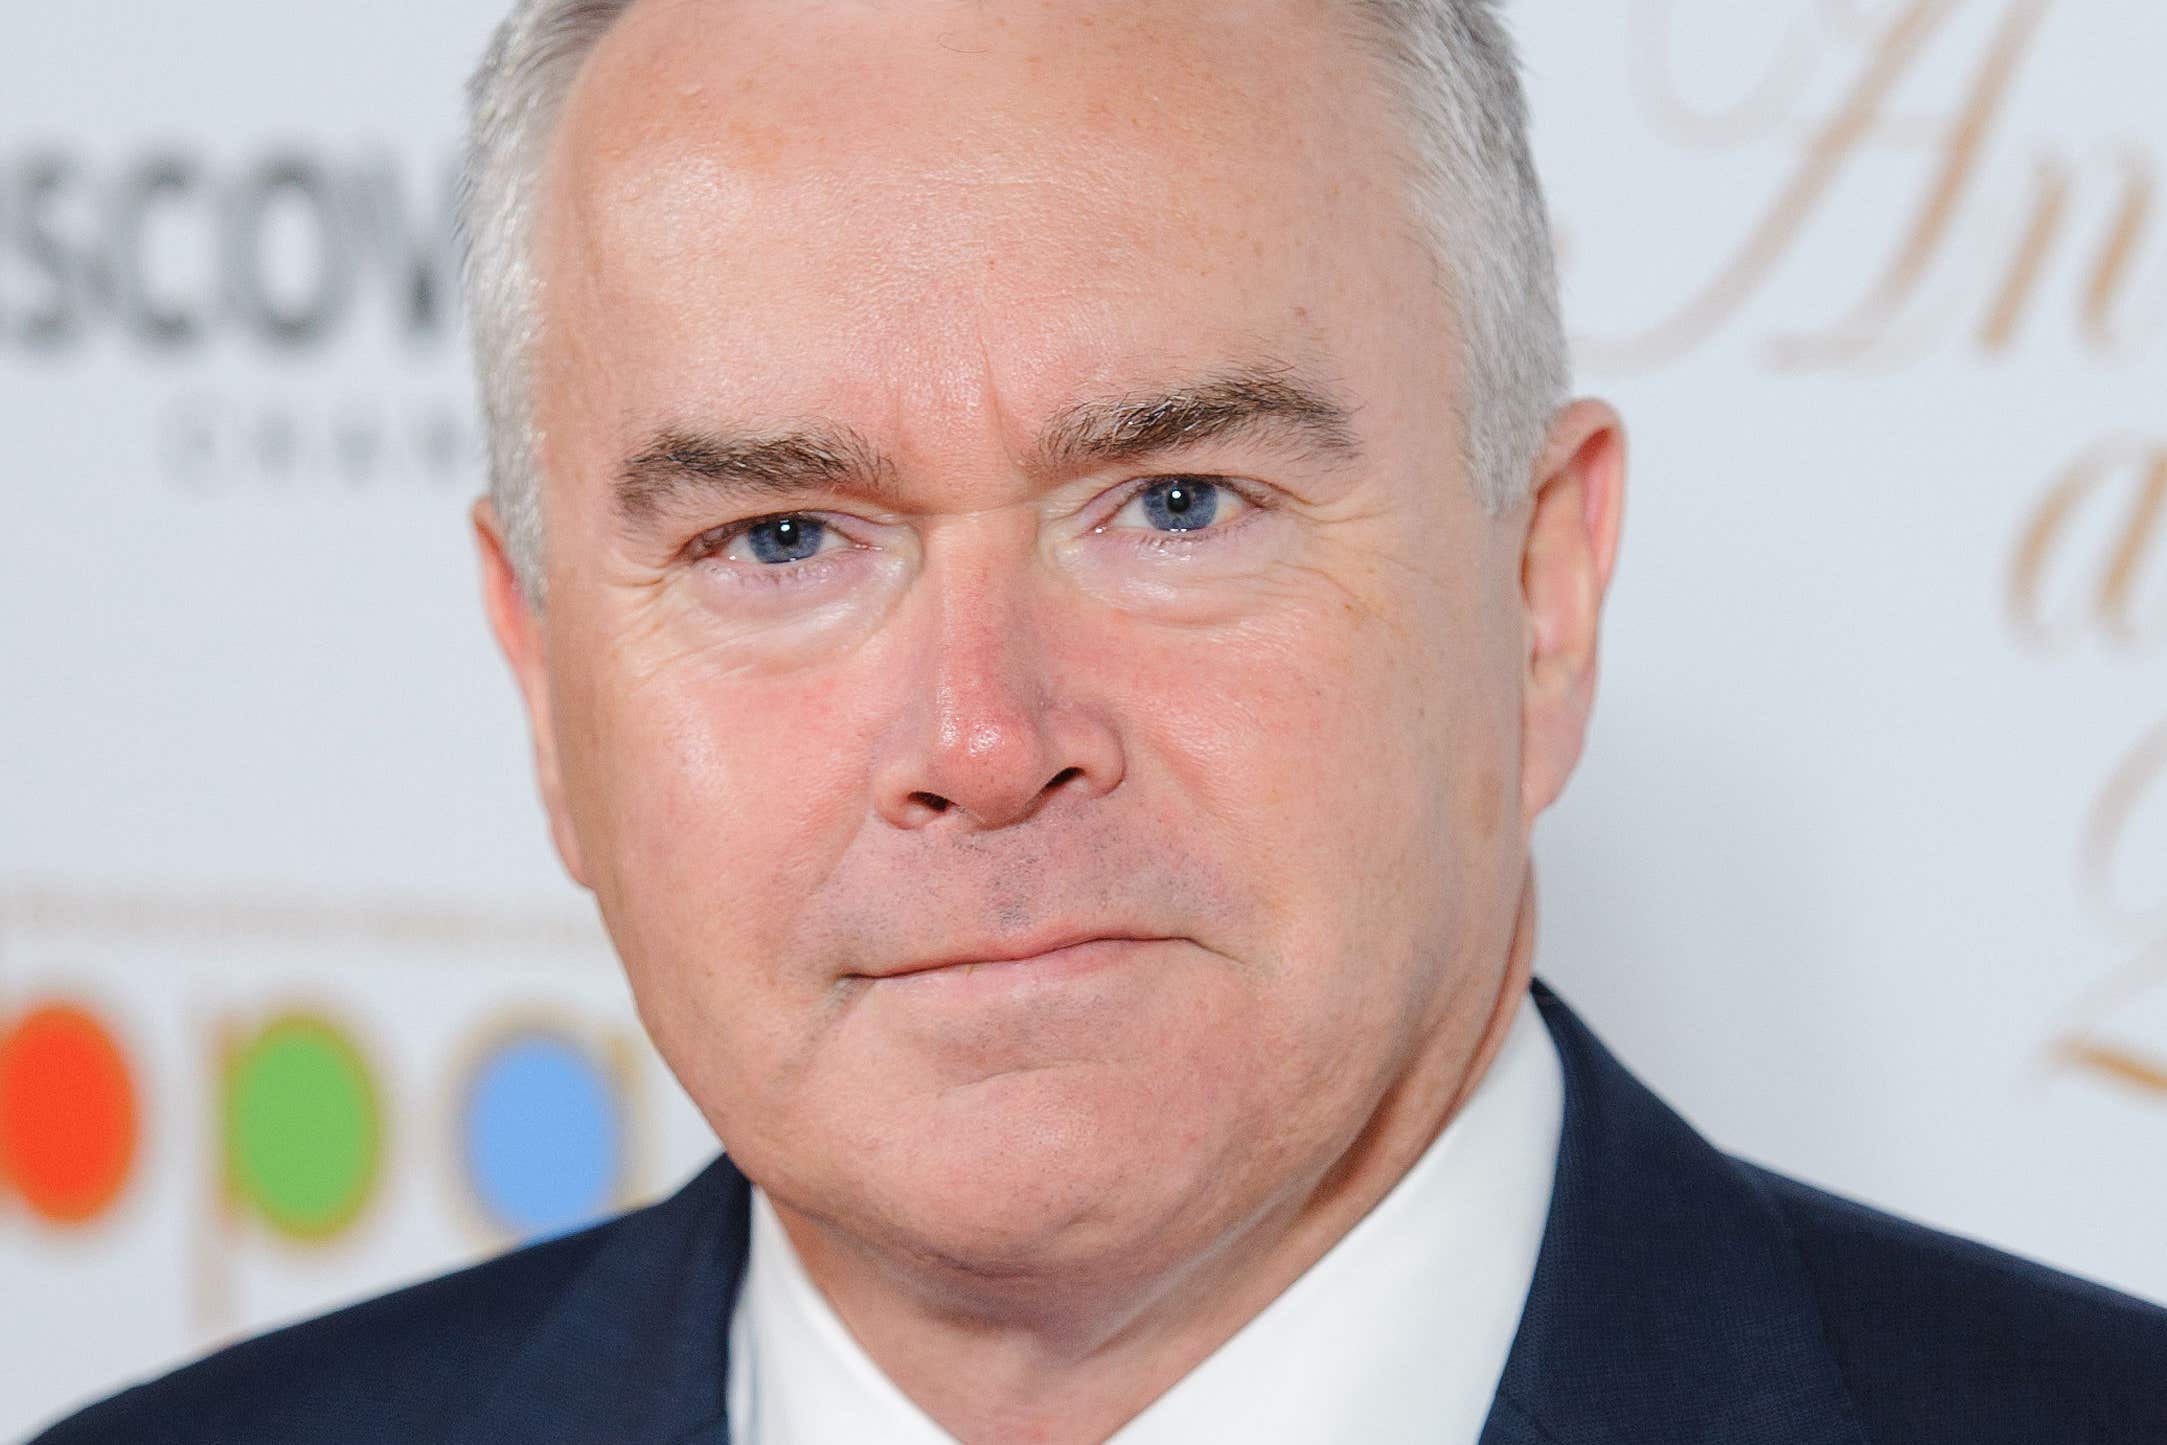 Broadcaster Huw Edwards named by his wife as BBC presenter at centre of scandal The Independent pic picture